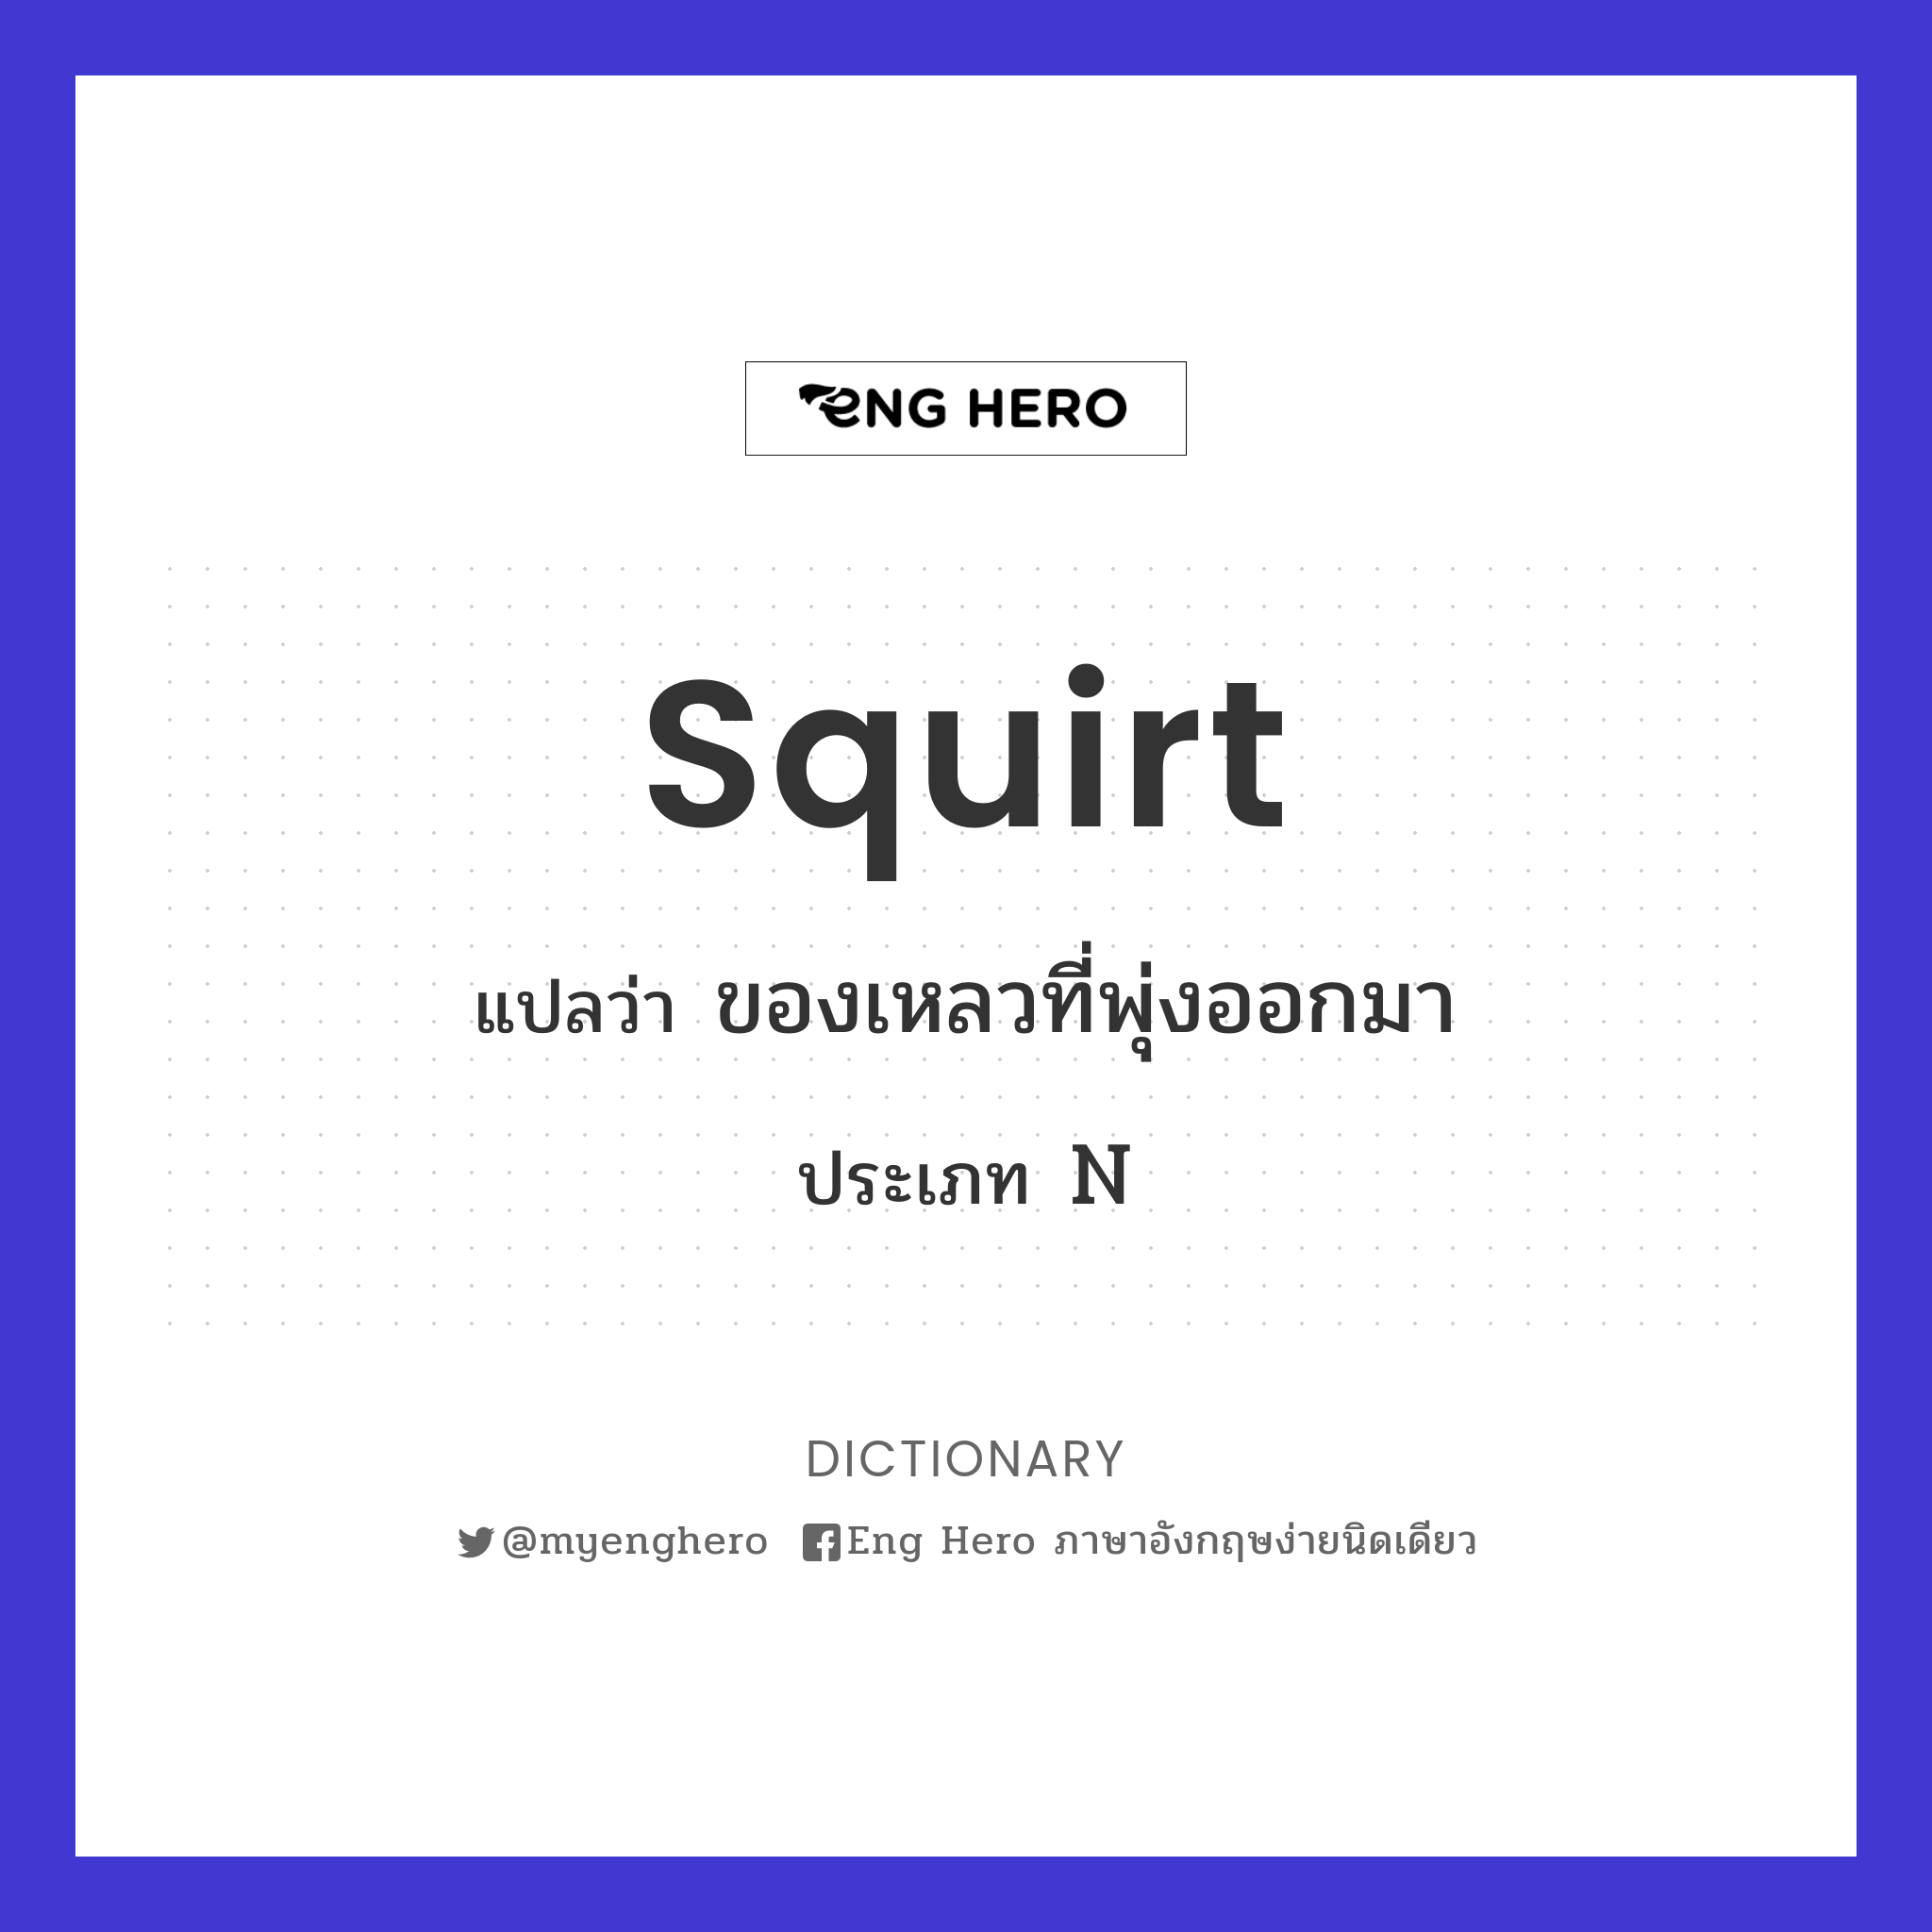 squirt